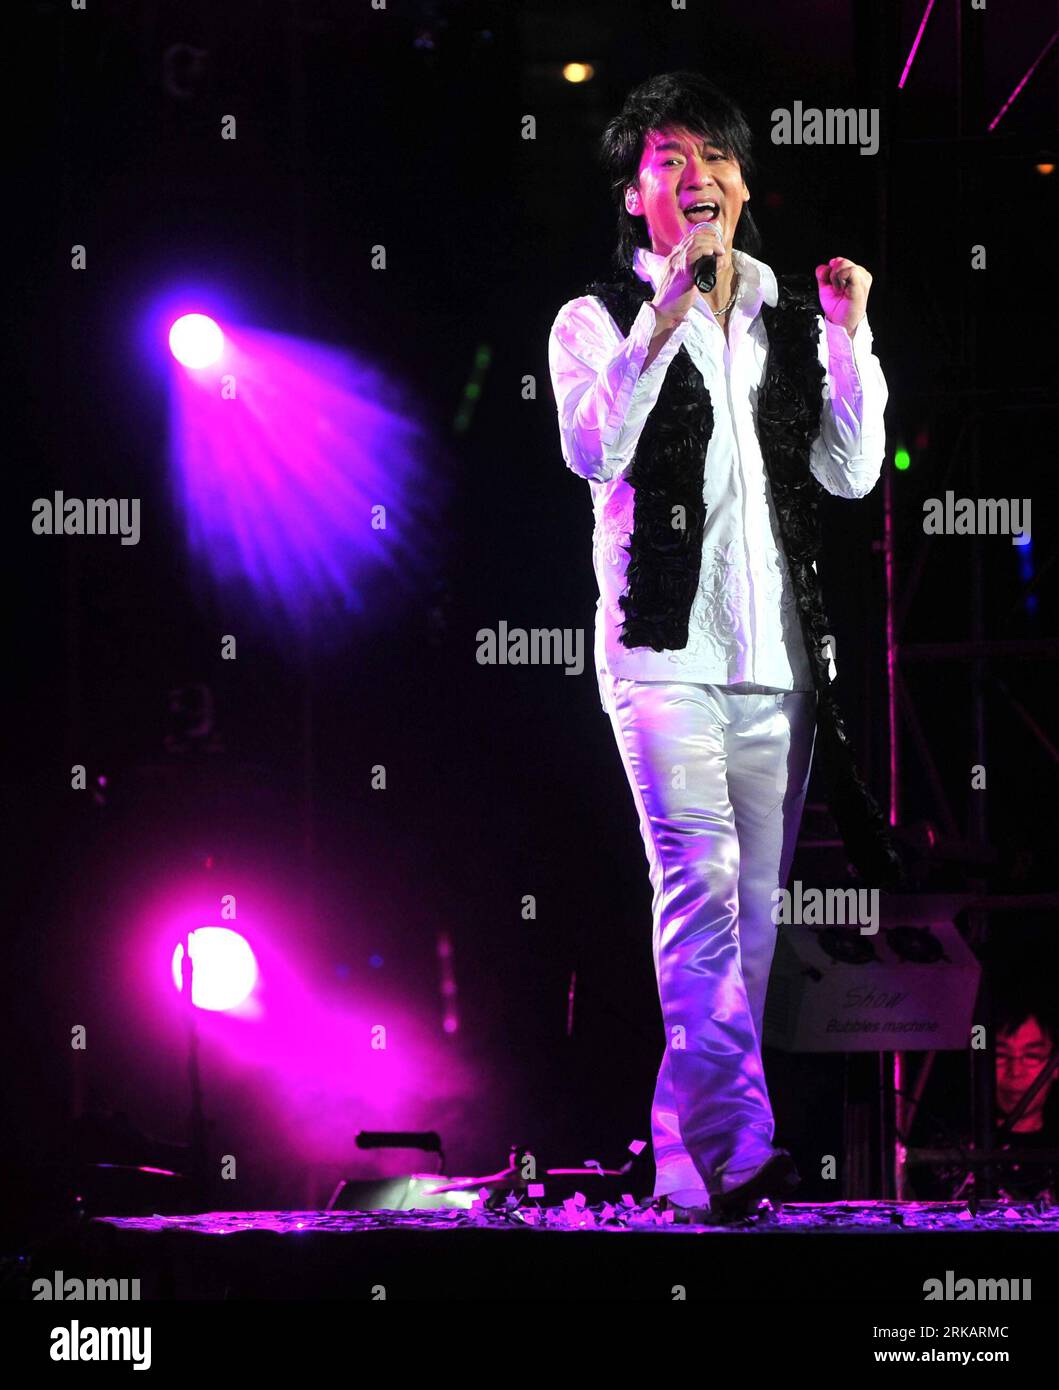 Bildnummer: 54420295  Datum: 11.09.2010  Copyright: imago/Xinhua (100912) -- WUHAN, Sept. 12, 2010 (Xinhua) -- Singer Emil Chau performs during the Wuhan stage of his 2010 tour concert in the gymnasium of the sports center in Wuhan, capital of central China s Hubei Province, Sept. 11, 2010. (Xinhua/Xiong Bo) (mcg) CHINA-WUHAN-EMIL CHAU-CONCERT (CN) PUBLICATIONxNOTxINxCHN People Entertainment Kultur Musik Aktion kbdig xdp 2010 hoch    Bildnummer 54420295 Date 11 09 2010 Copyright Imago XINHUA  Wuhan Sept 12 2010 XINHUA Singer Emil Chau performs during The Wuhan Stage of His 2010 Tour Concert in Stock Photo